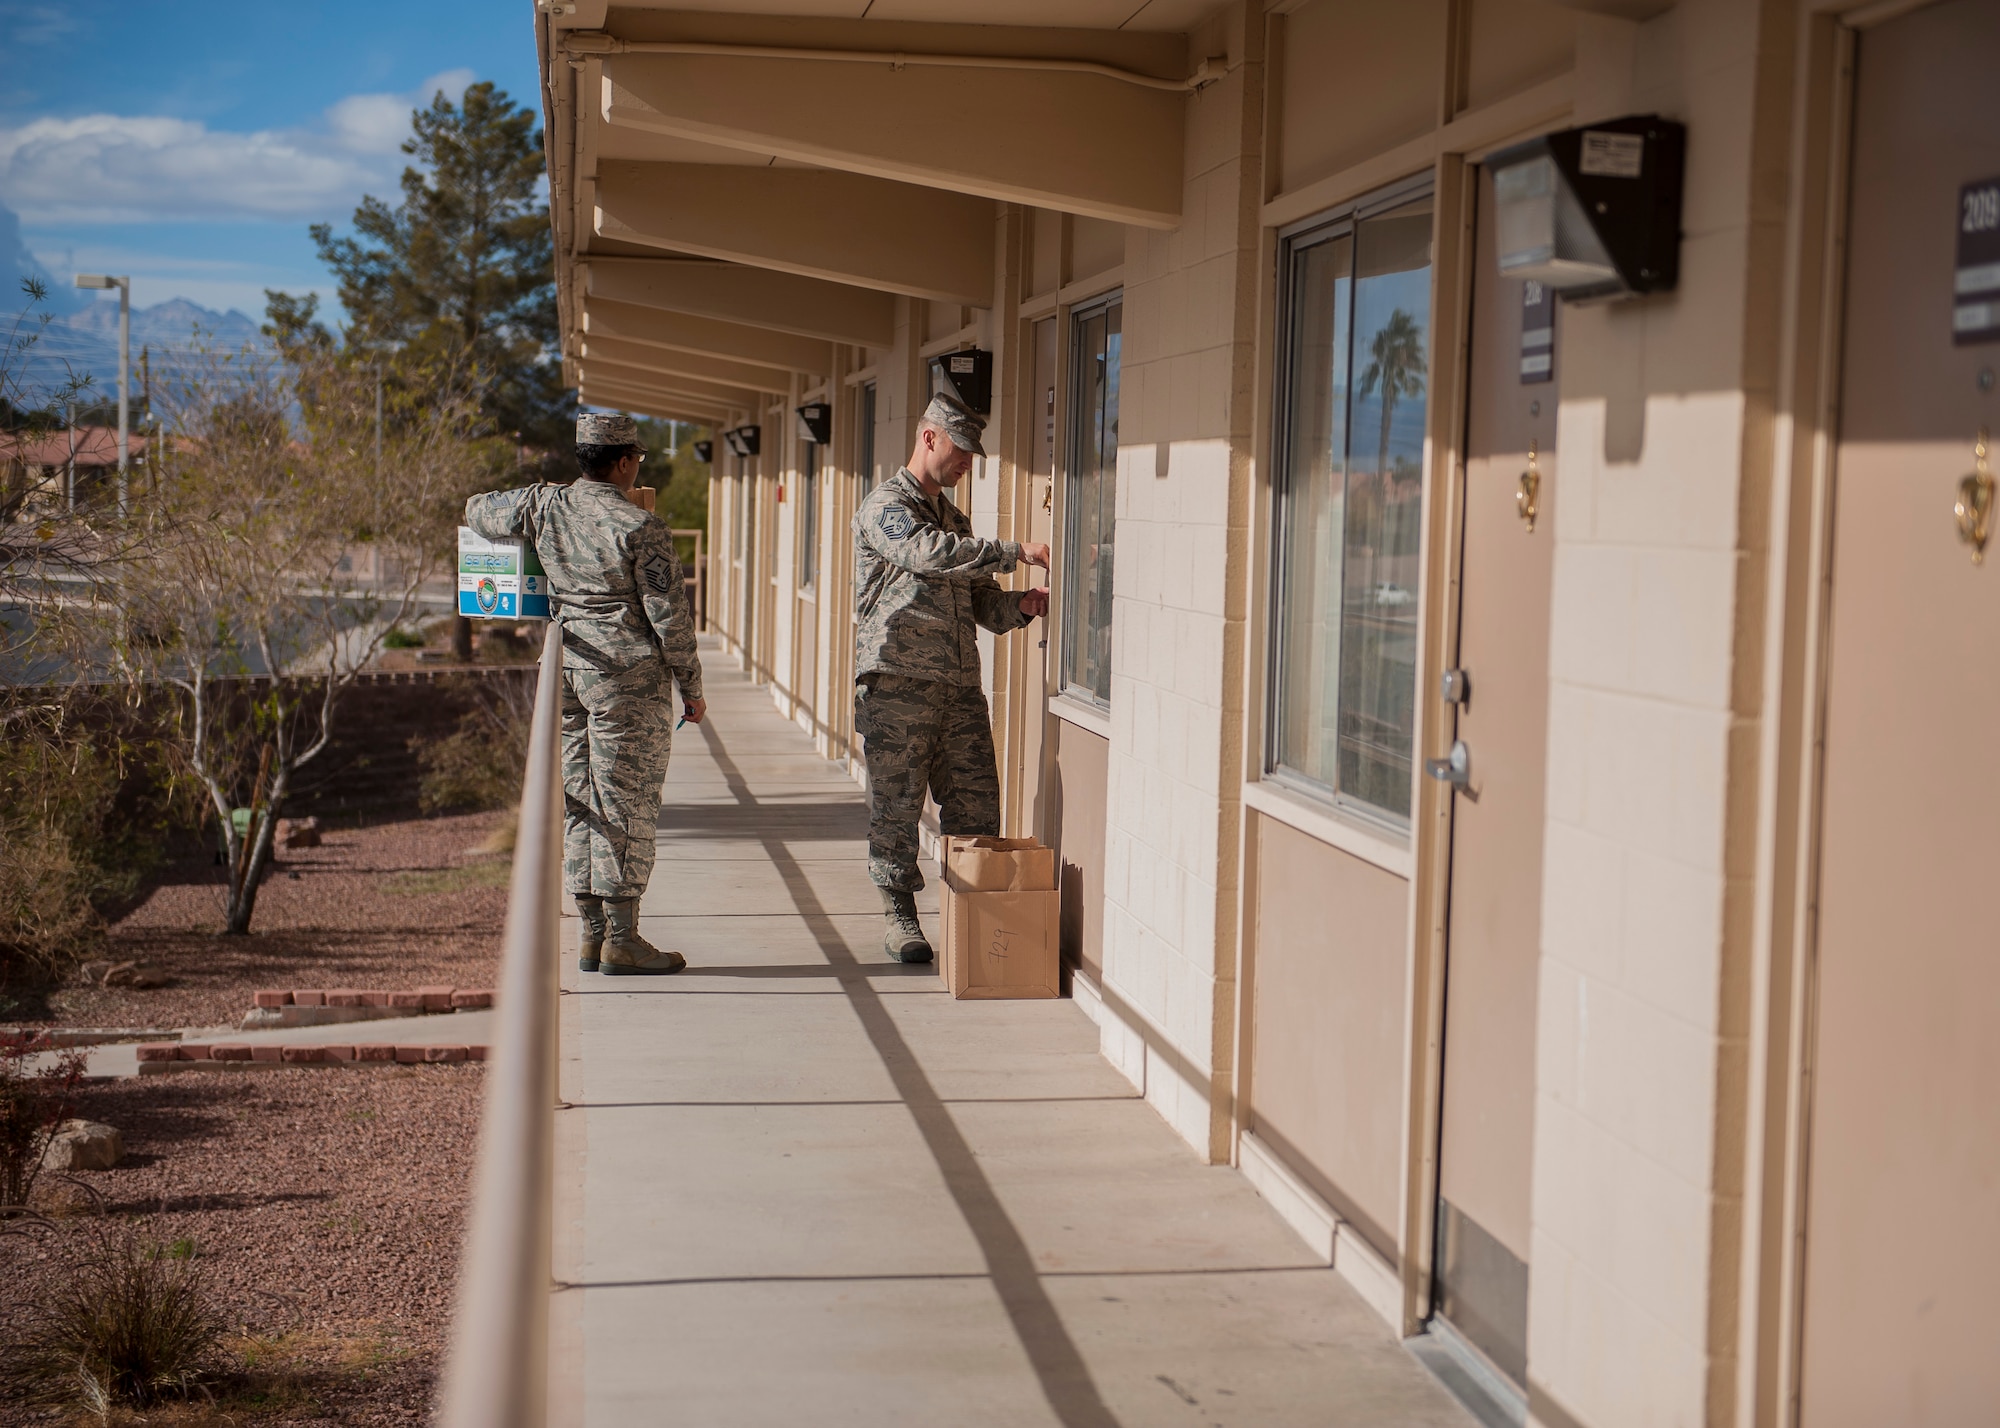 Master Sgt. Ira Jack, 57th Aircraft Maintenance Squadron first sergeant, and Senior Master Sgt. Christopher McEwan, 99th Security Forces Squadron first sergeant, deliver cookies to Airmen living in the dorms during the Airman Cookie Drive at Nellis Air Force Base, Nev., Dec. 14, 2015. During the cookie drive, people and organizations in the Nellis AFB community came together to give Airmen a taste of home during the holidays. (U.S. Air Force photo by Staff Sgt. Siuta B. Ika)